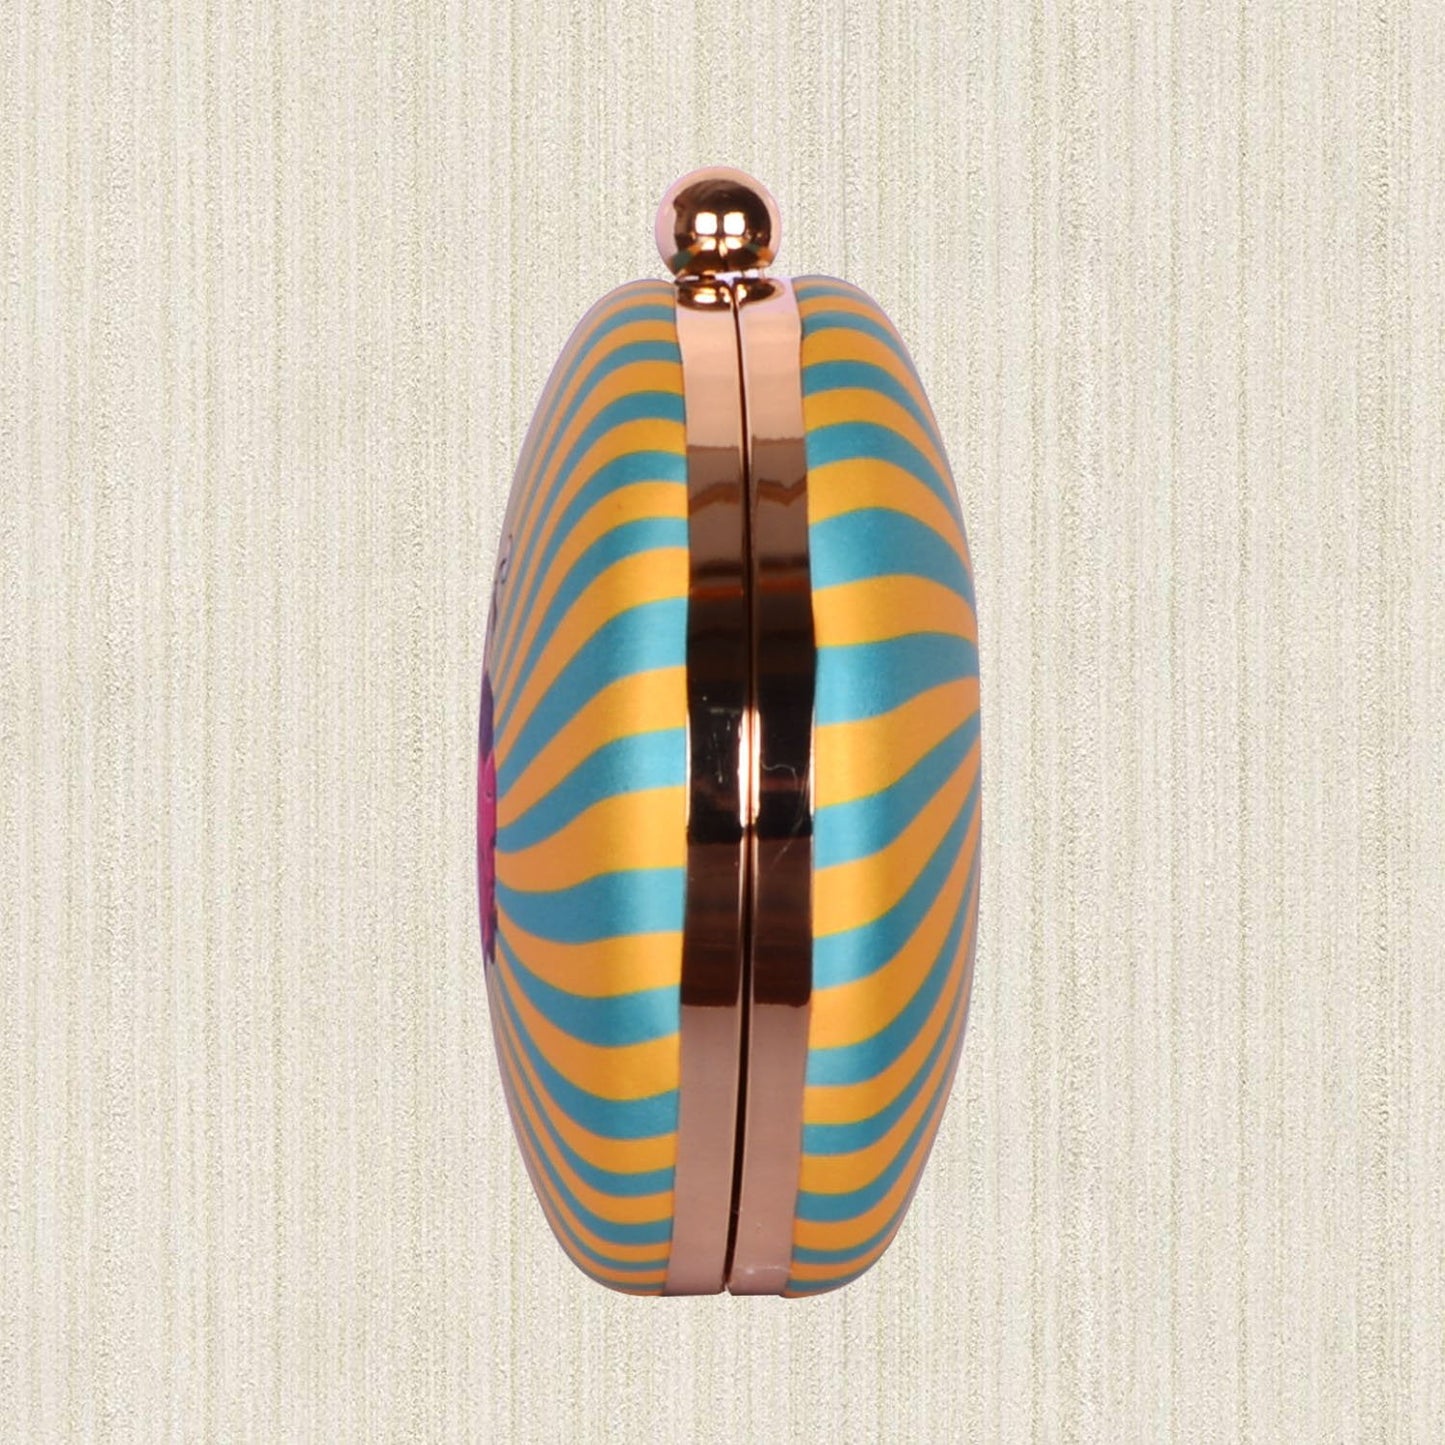 Arktlim Retro Scooter Printed Clutch